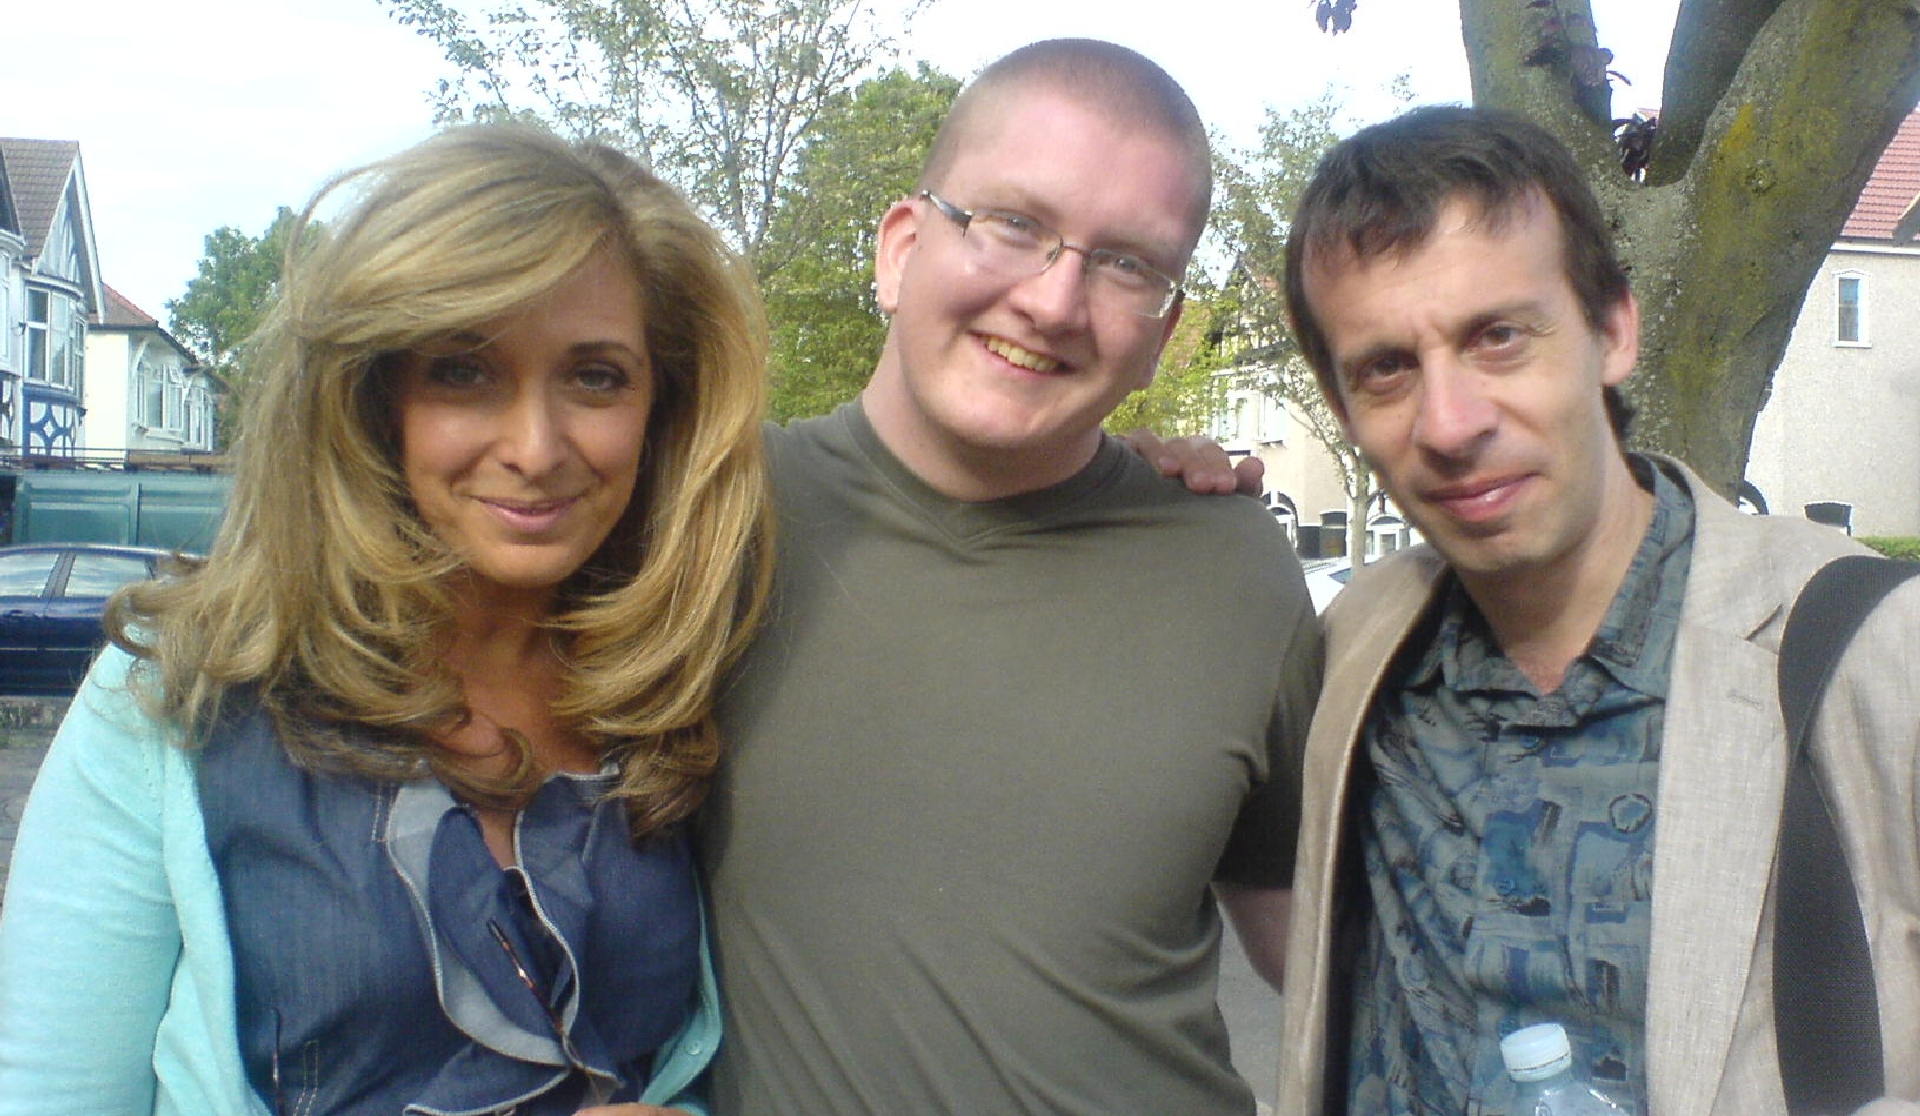 With Tracy Ann Oberman and David Schneider in 2010